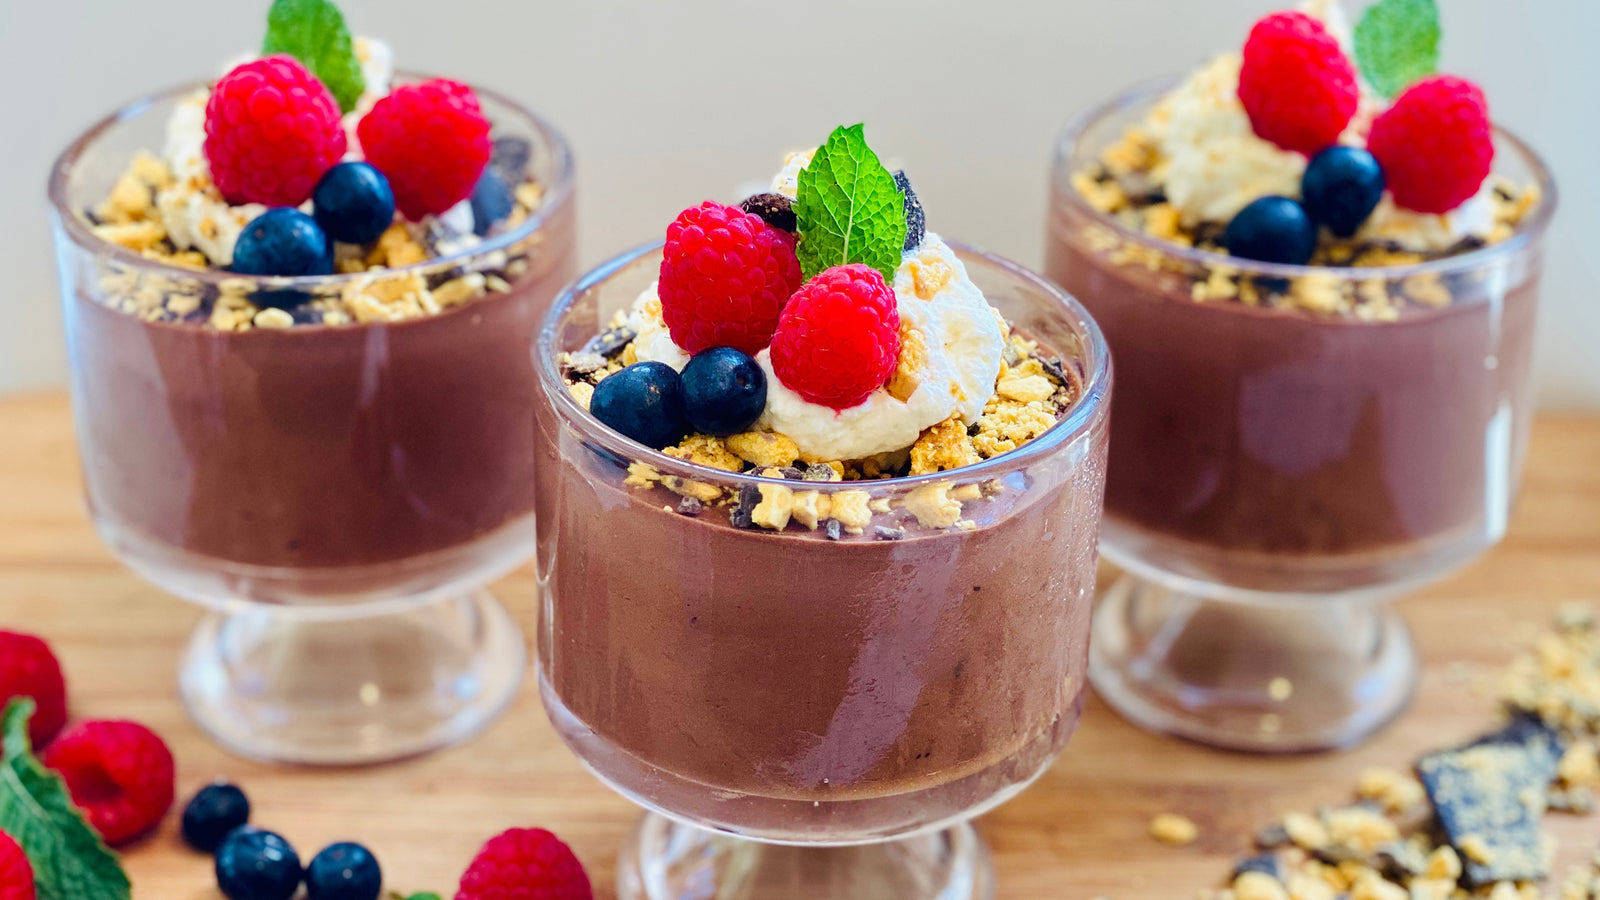 Violet Crumble Chocolate Mousse